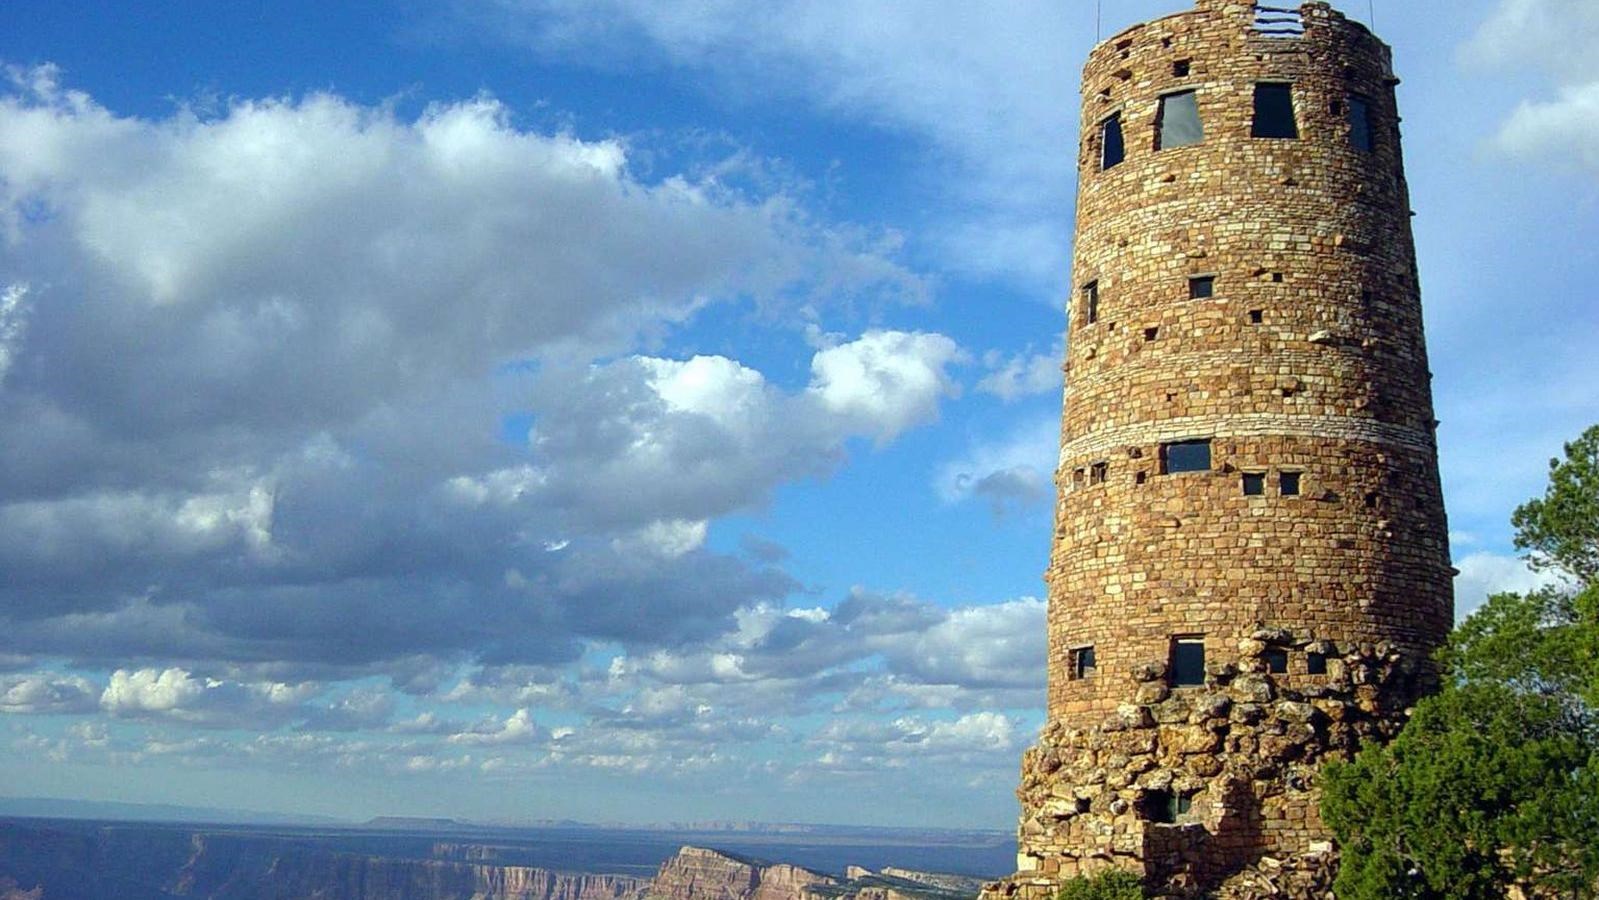 A circular stone tower, 70 feet tall perched on the edge of a vast canyon